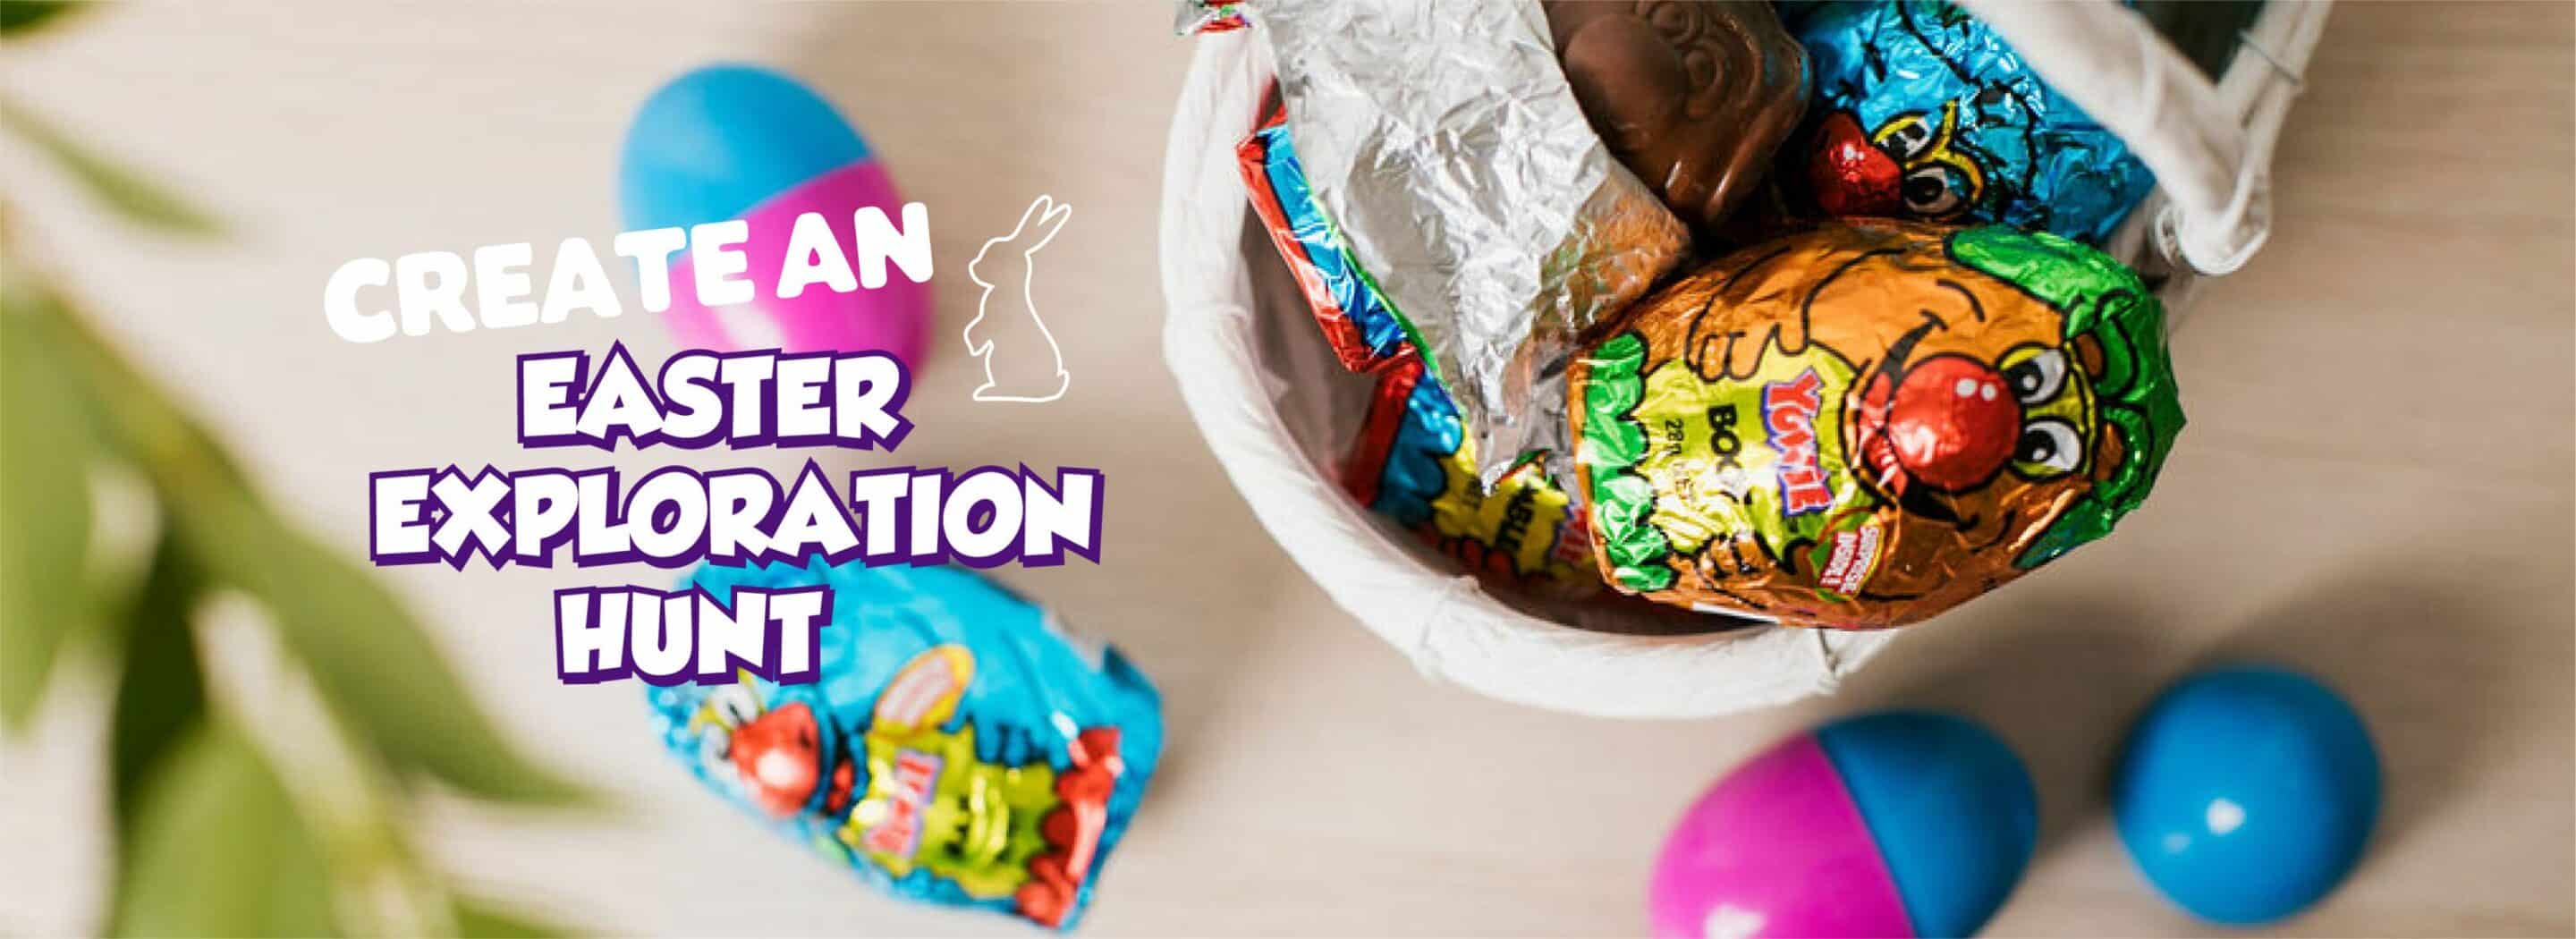 Crafts And Printables Create An Easter Exploration Hunt Header